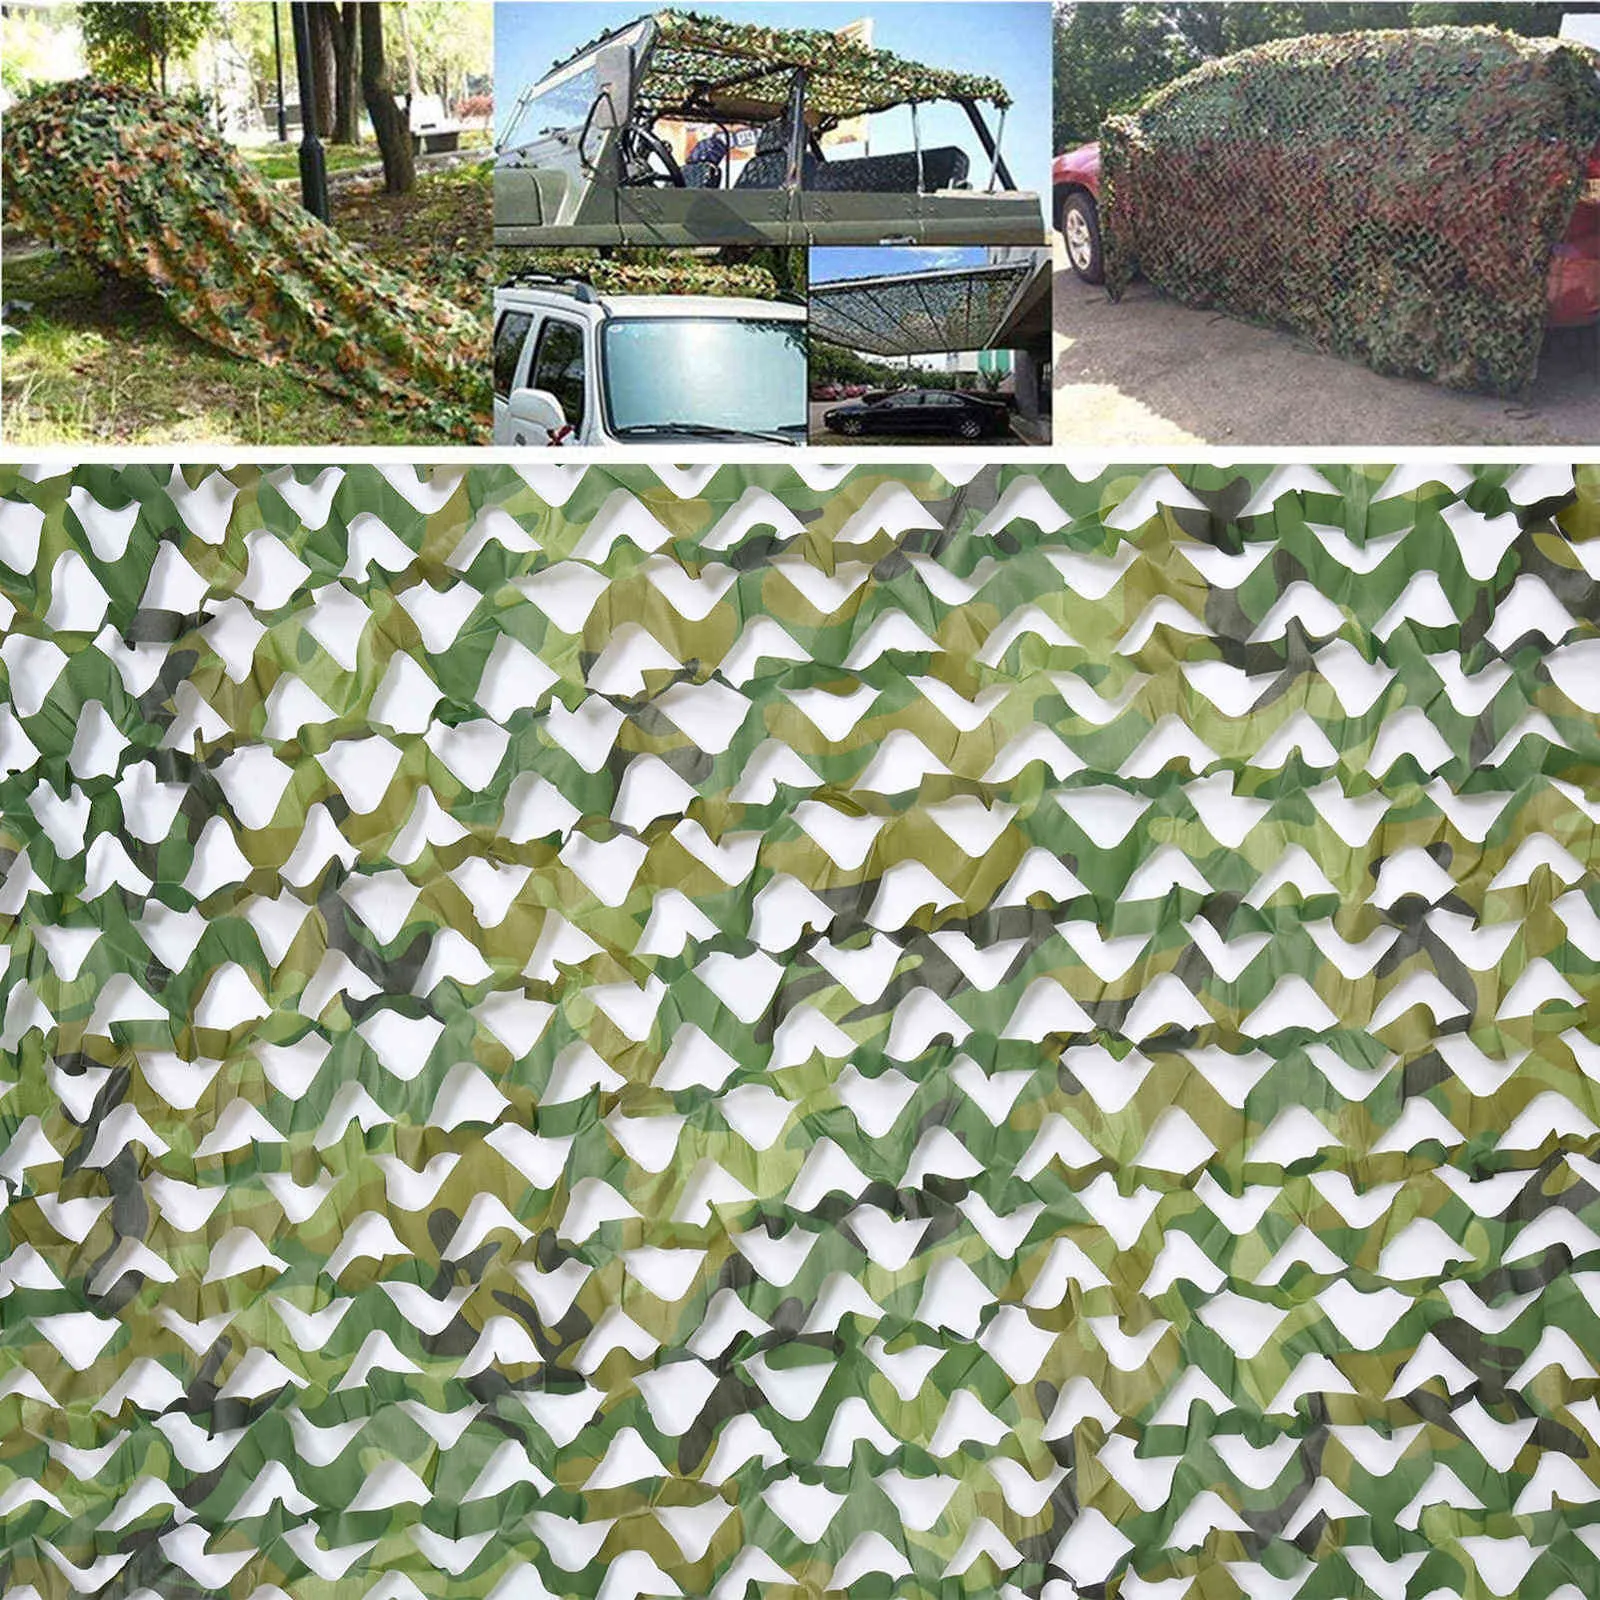 Jakt Armé Camo Netting Utomhus Jungle Camouflage Sunscreen Net Woodland Privacy Protection Mesh Forest Shade Tent för Camping Y0706